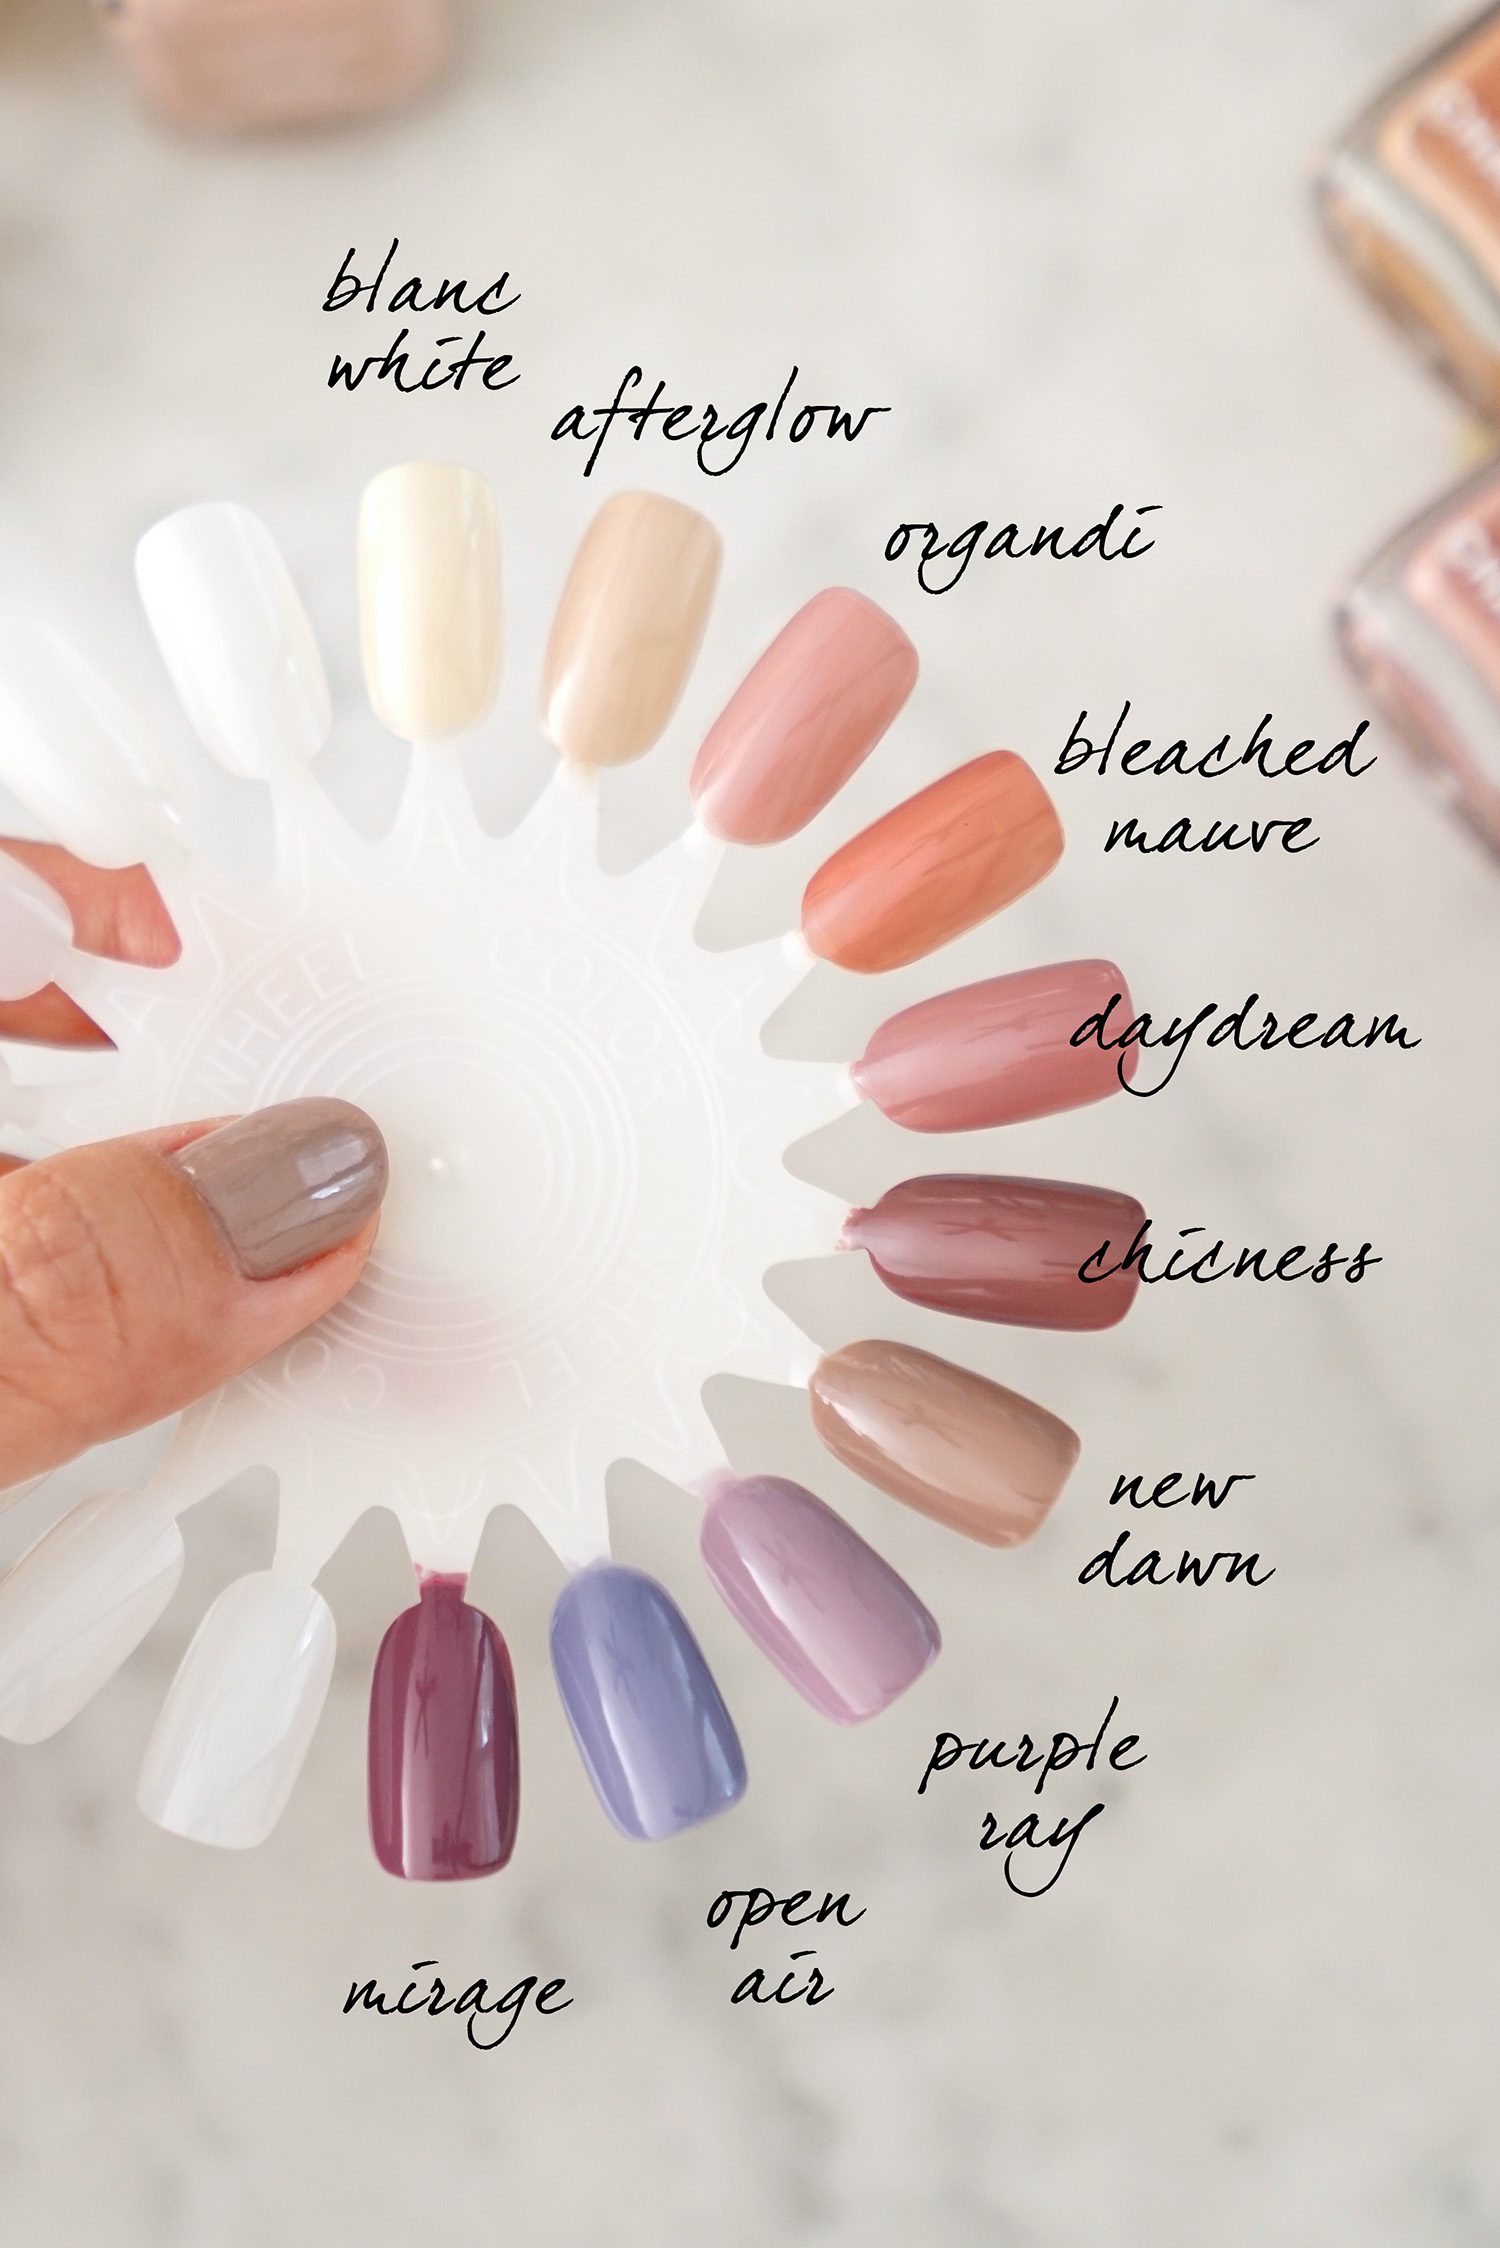 Best Chanel Le Vernis Neutrals + Soft Shades for Spring - The